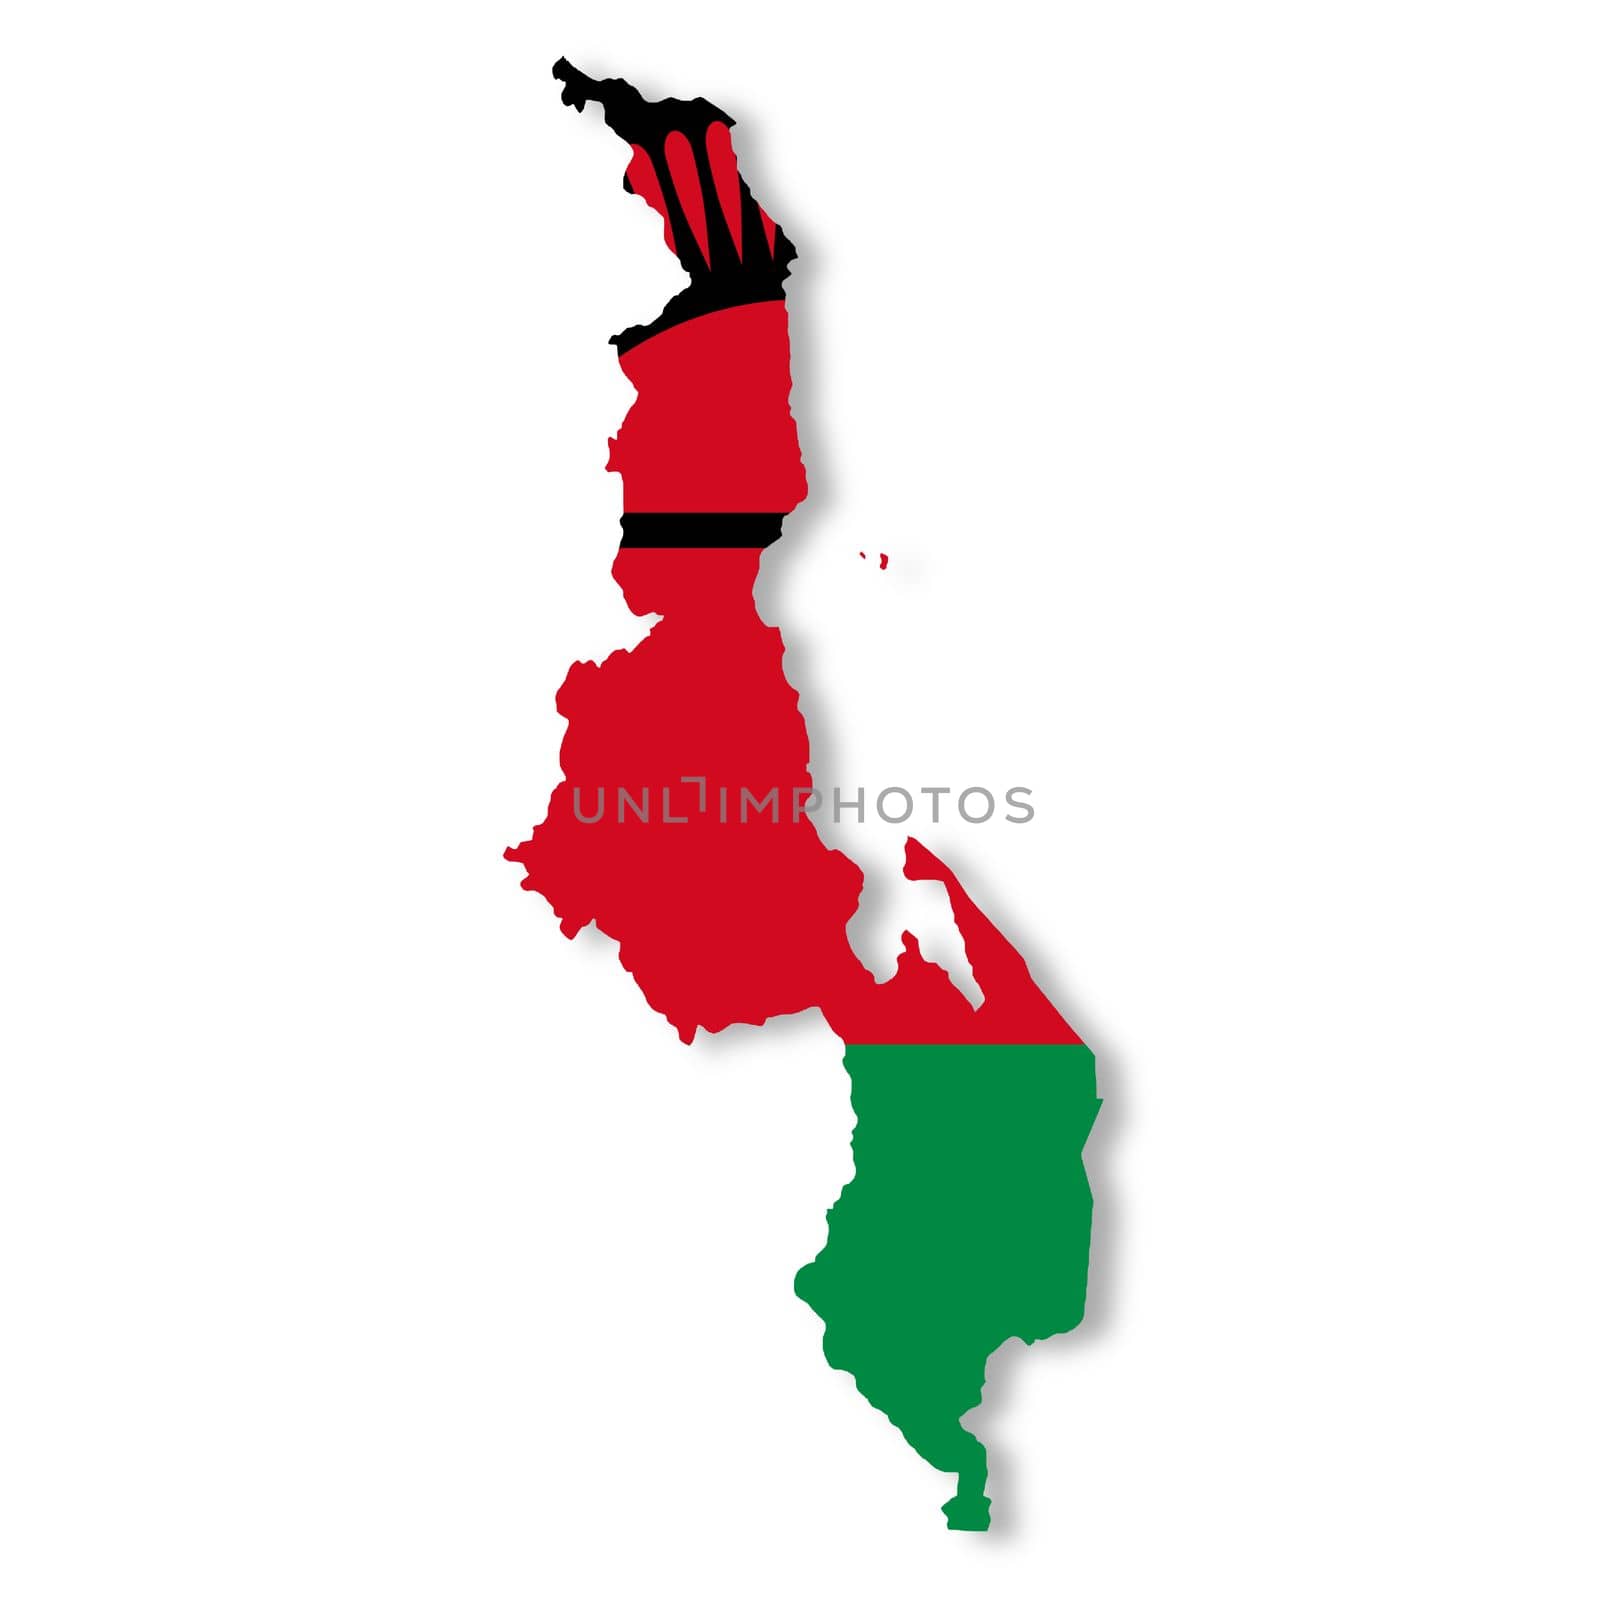 A Malawi flag map on white background with clipping path 3d illustration